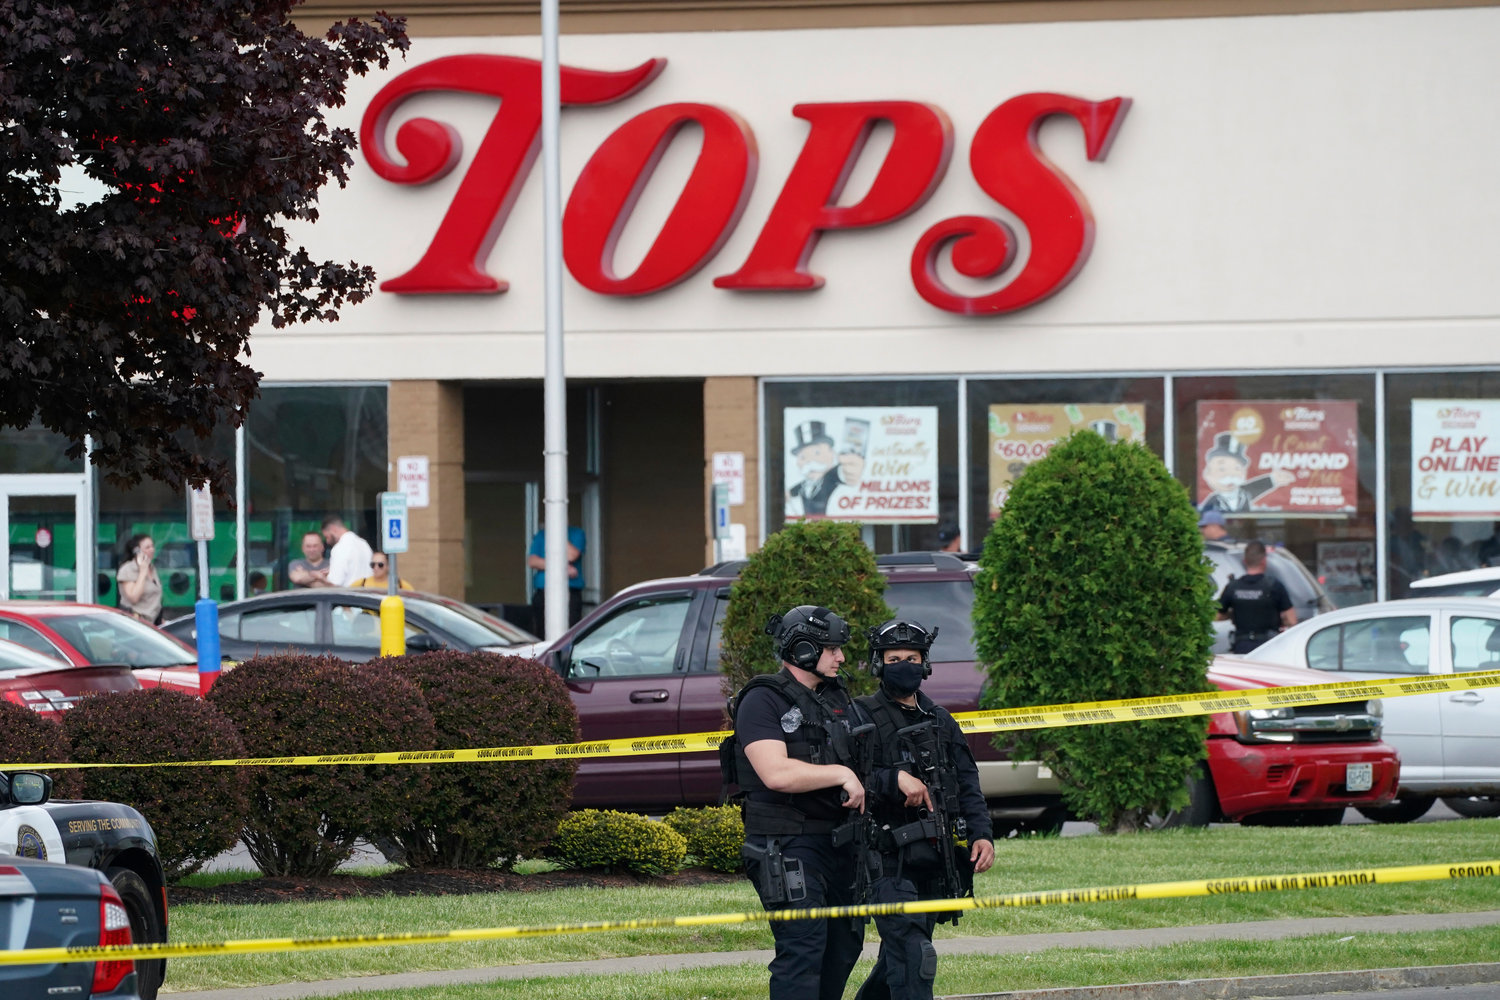 FILE - Police secure an area around a supermarket where several people were killed in a shooting, Saturday, May 14, 2022, in Buffalo, N.Y.  New York‚Äôs new law barring sales of bullet-resistant vests to most civilians doesn't cover the type of armor worn by the gunman who killed 10 people at the Buffalo supermarket, a gap that could limit its effectiveness in deterring future military-style assaults. (Derek Gee/The Buffalo News via AP, File)